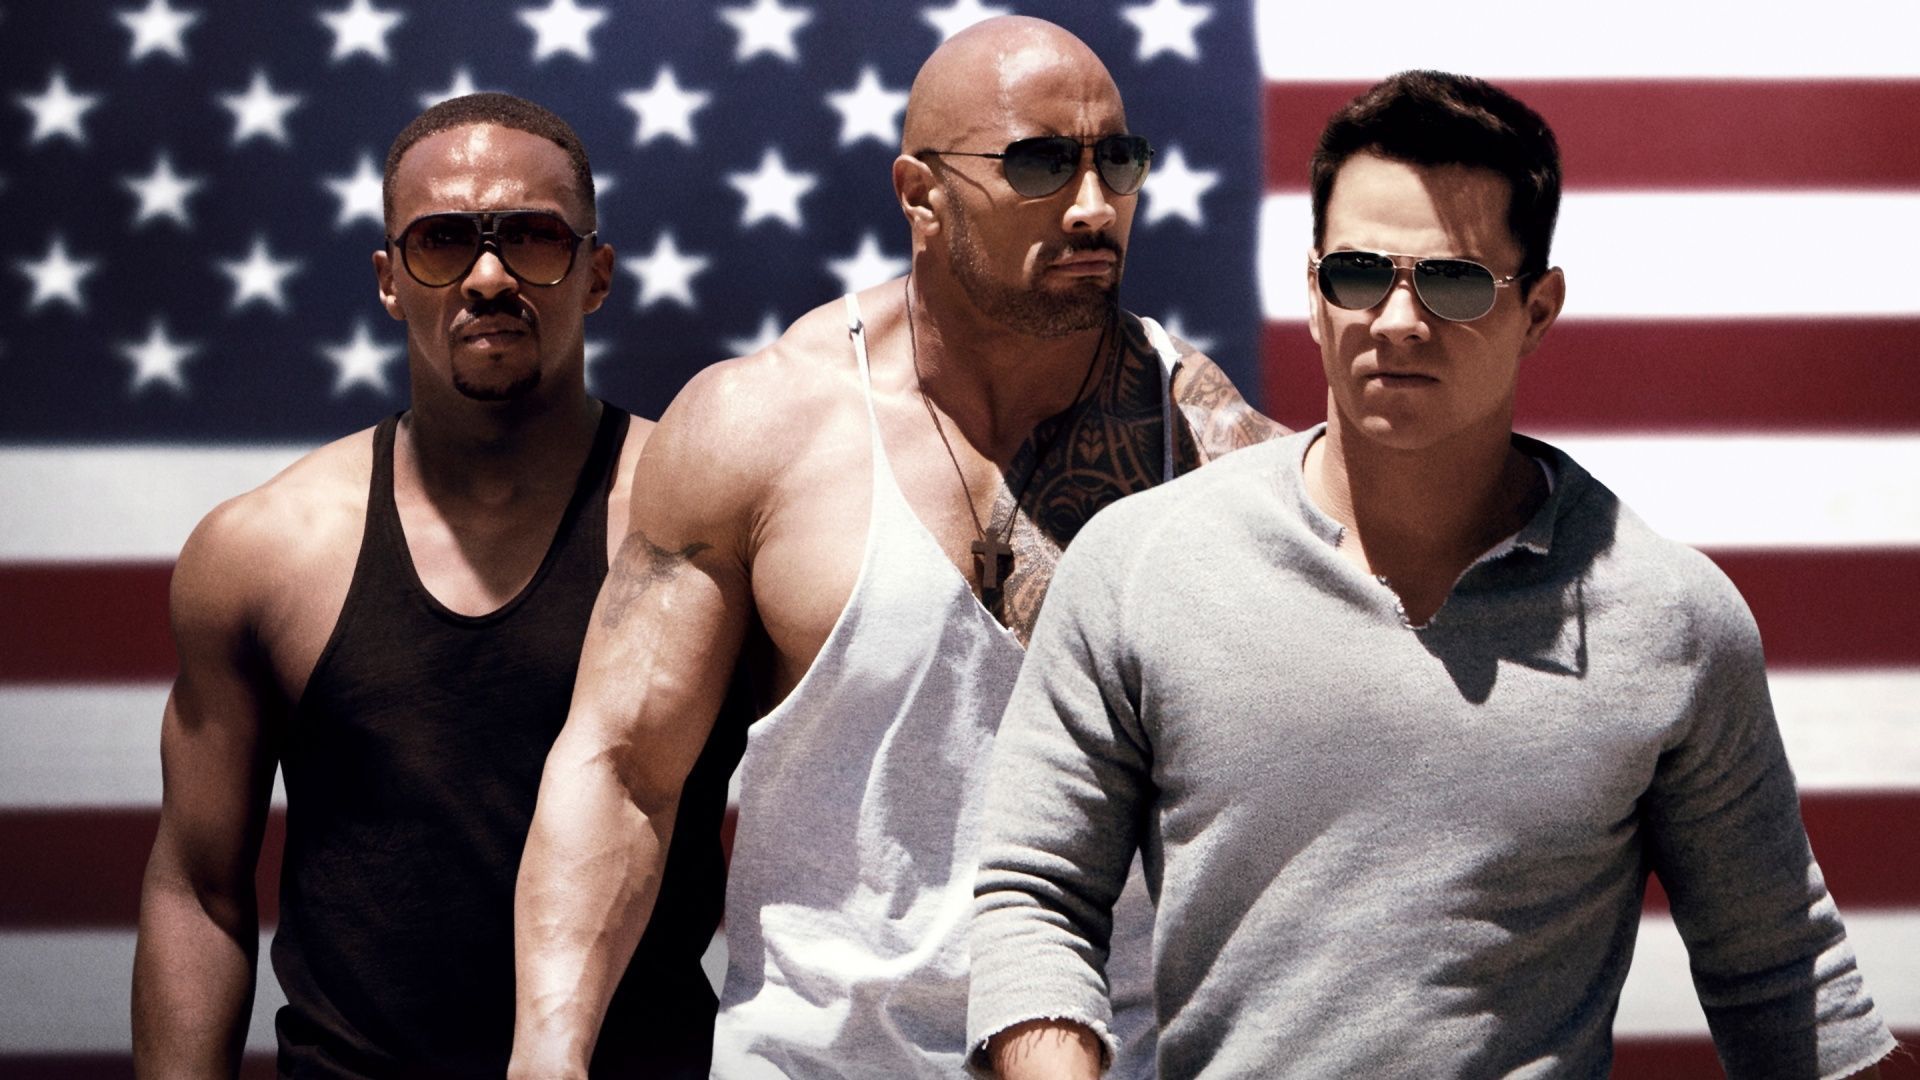 1920x1080 Pain and gain movie Wallpaper